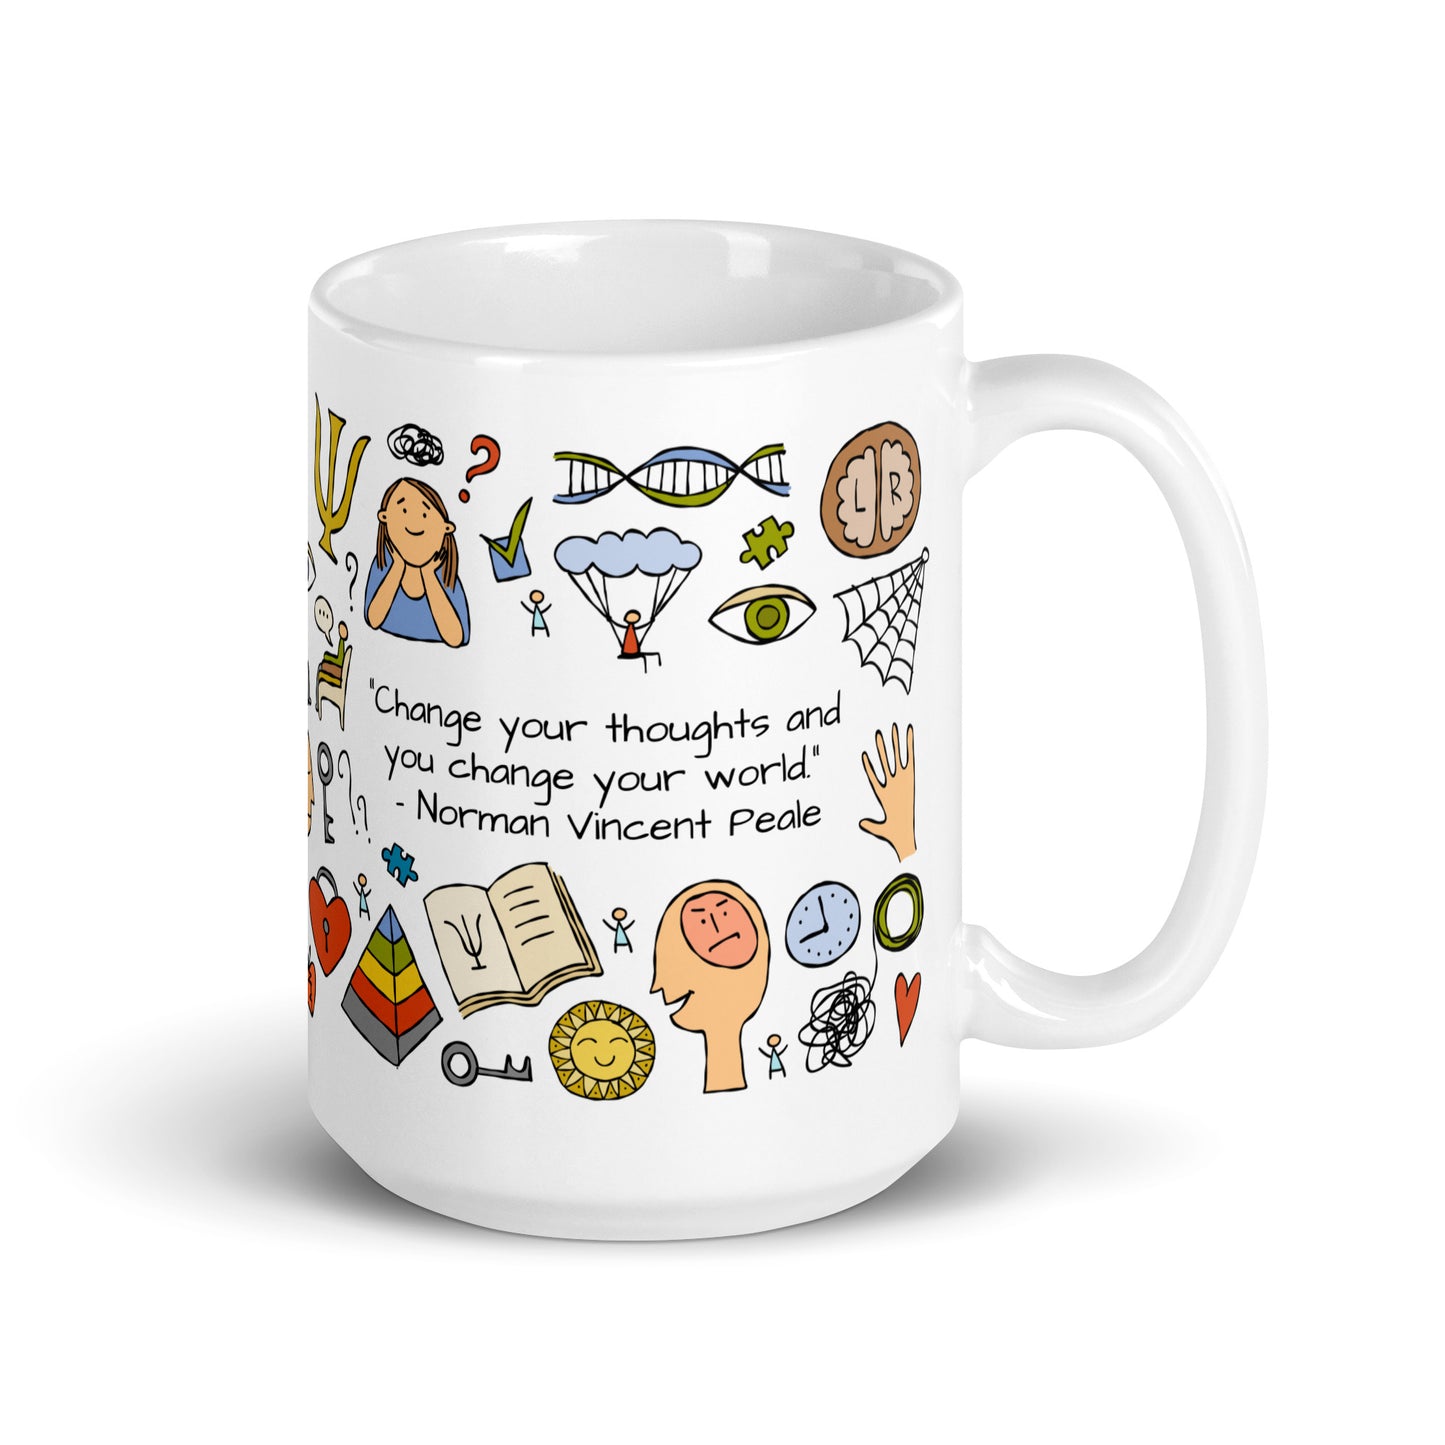 Personalized funny Psychology concept art mug 15oz with the quote "Change your thoughts and you change your world" by Norman Vincent Peale.